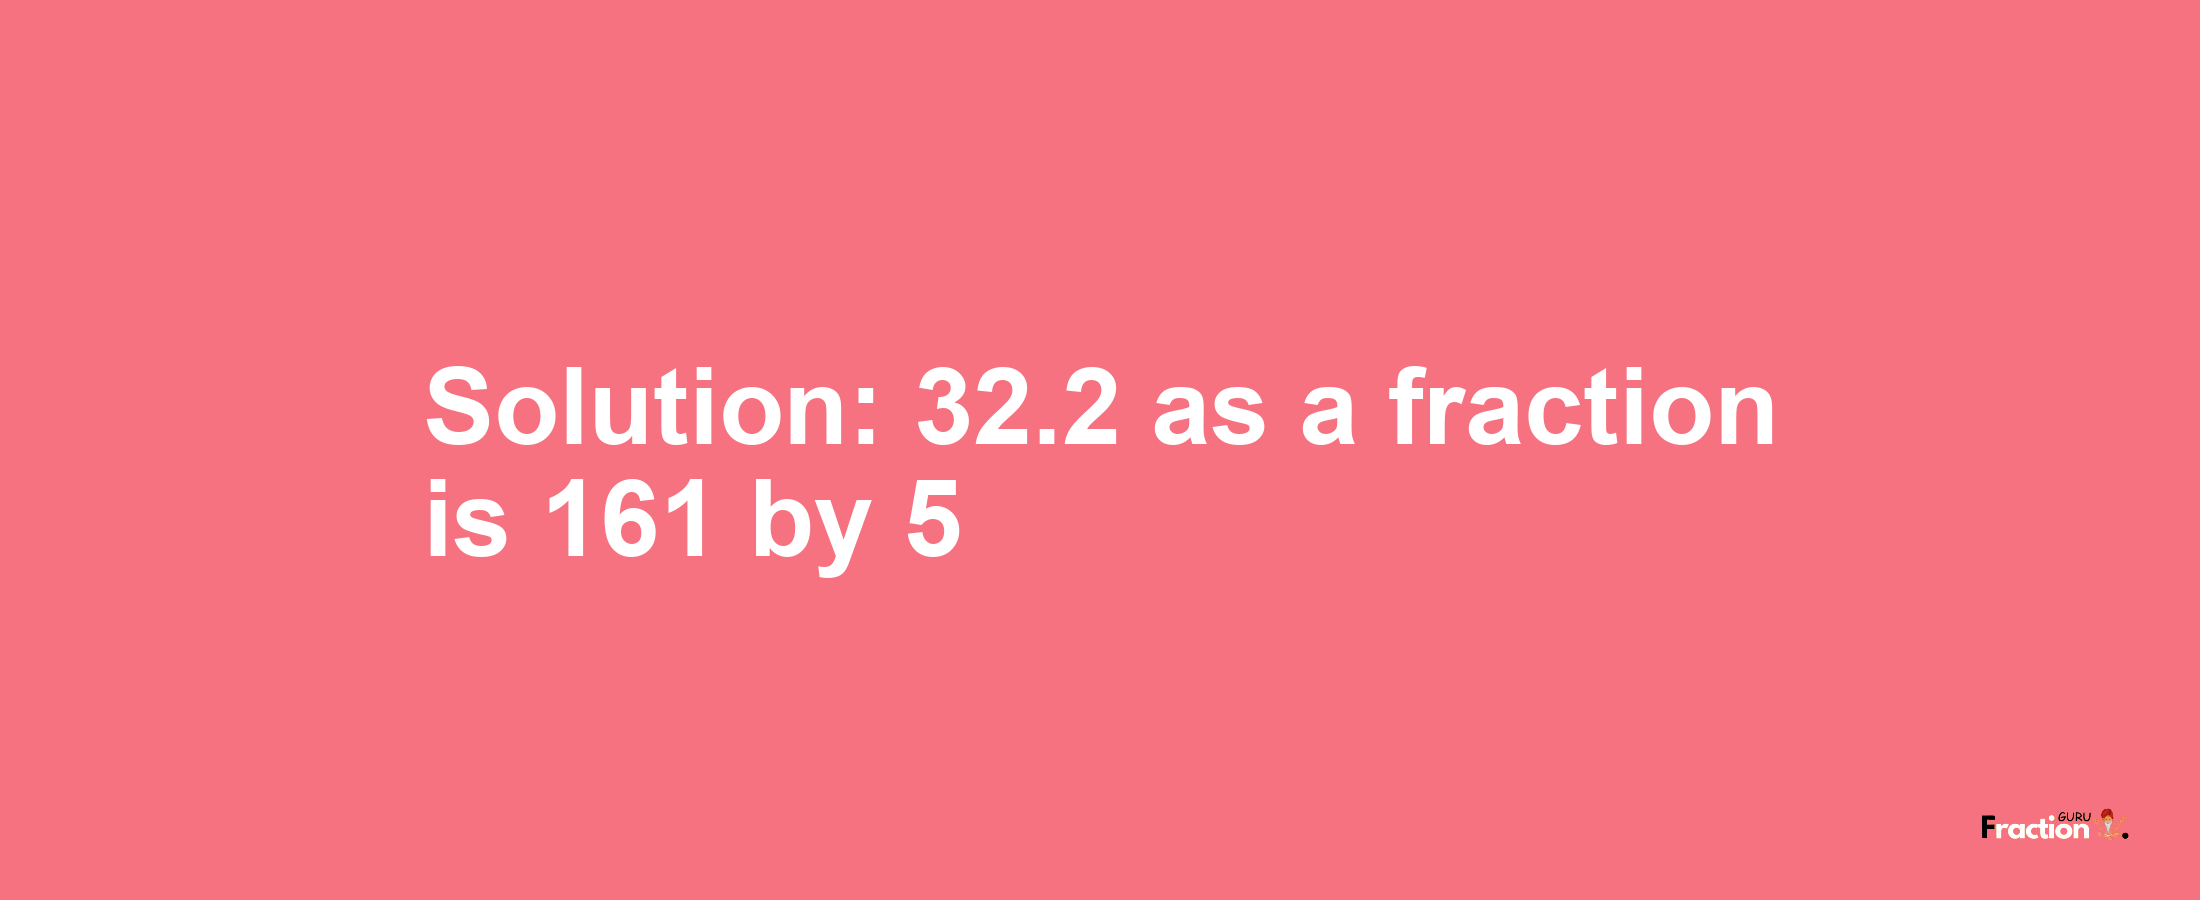 Solution:32.2 as a fraction is 161/5